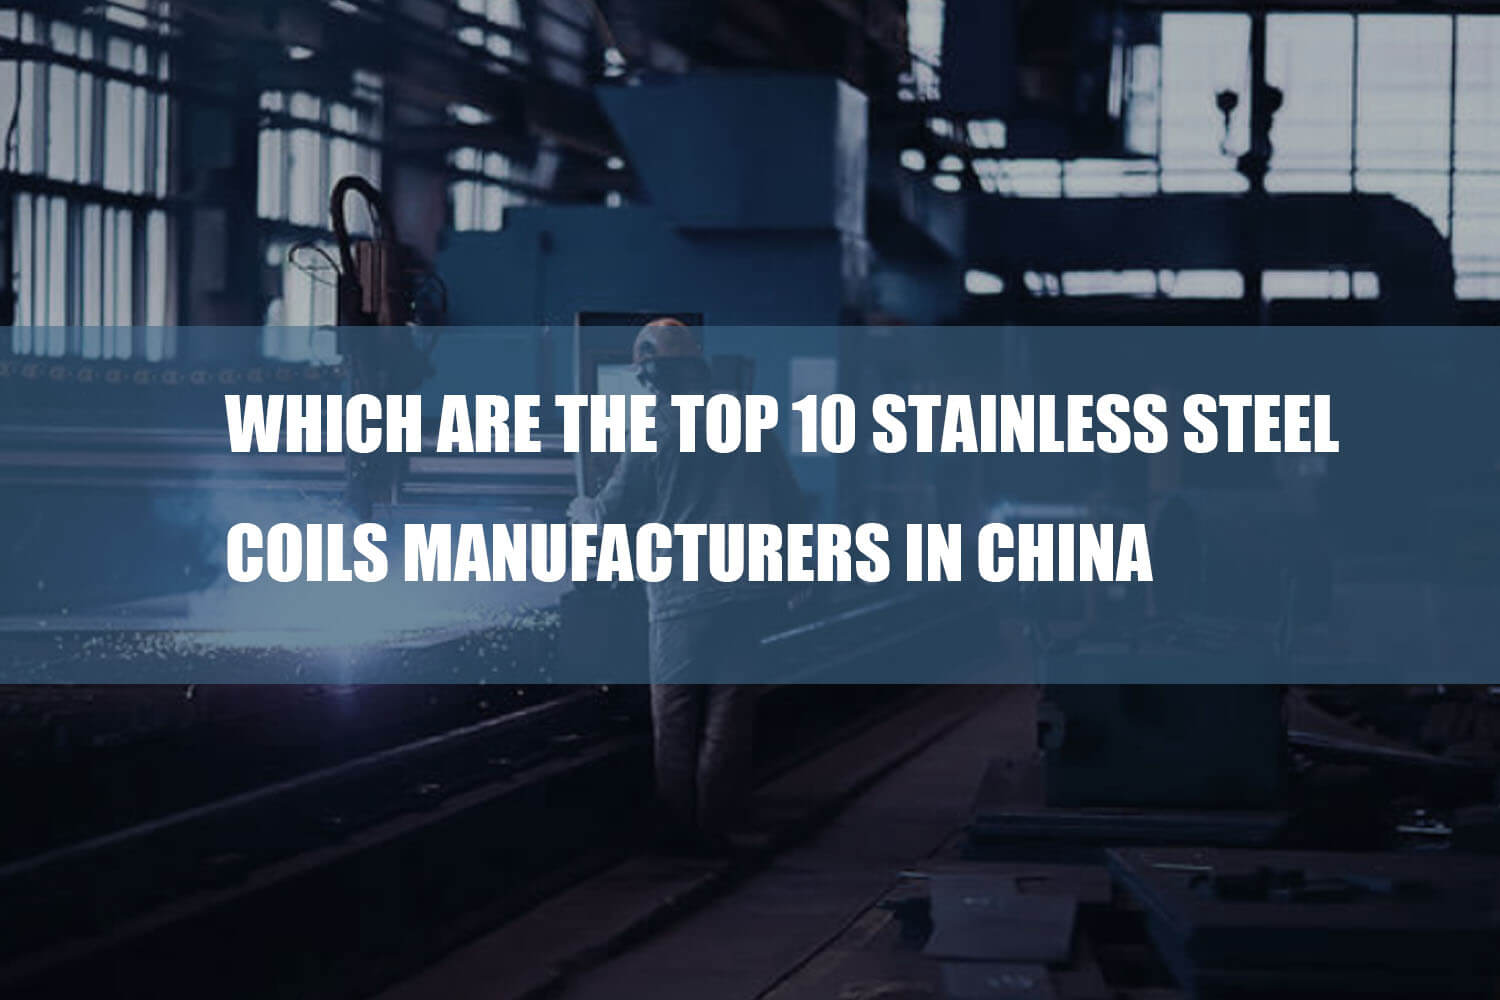 which are the top 10 stainless steel coils manufacturers in china